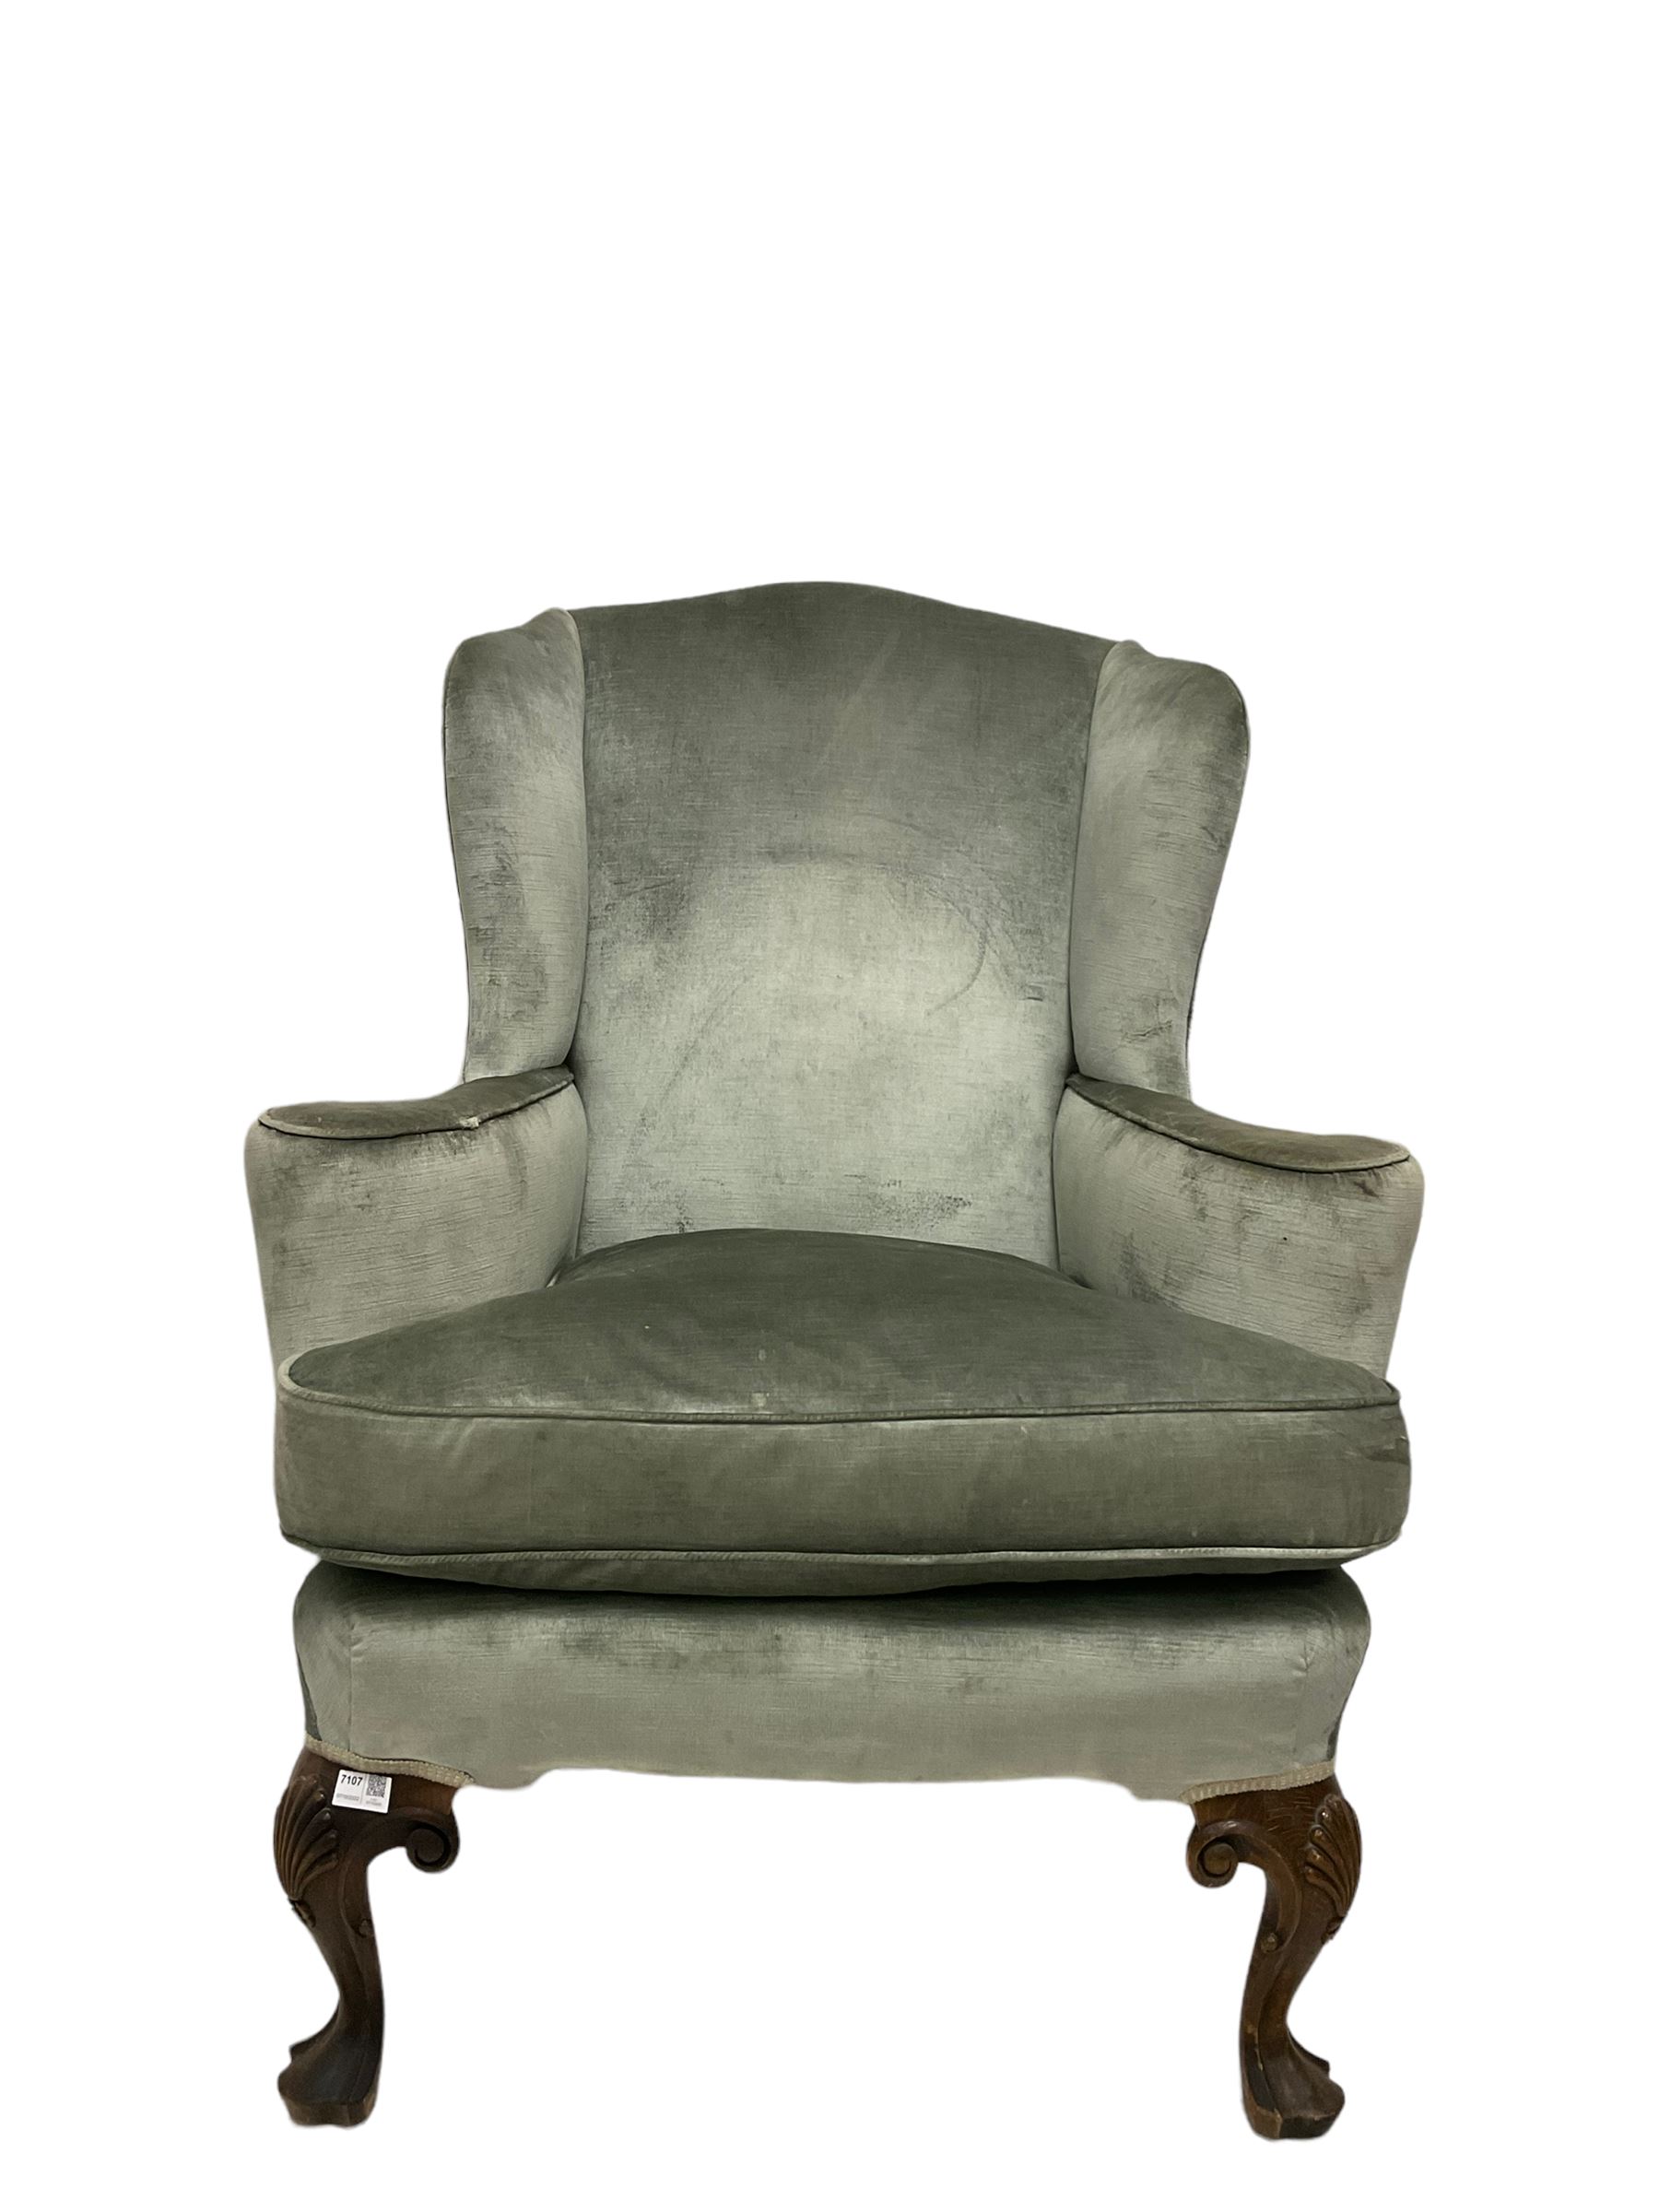 Victorian wingback armchair - Image 3 of 3